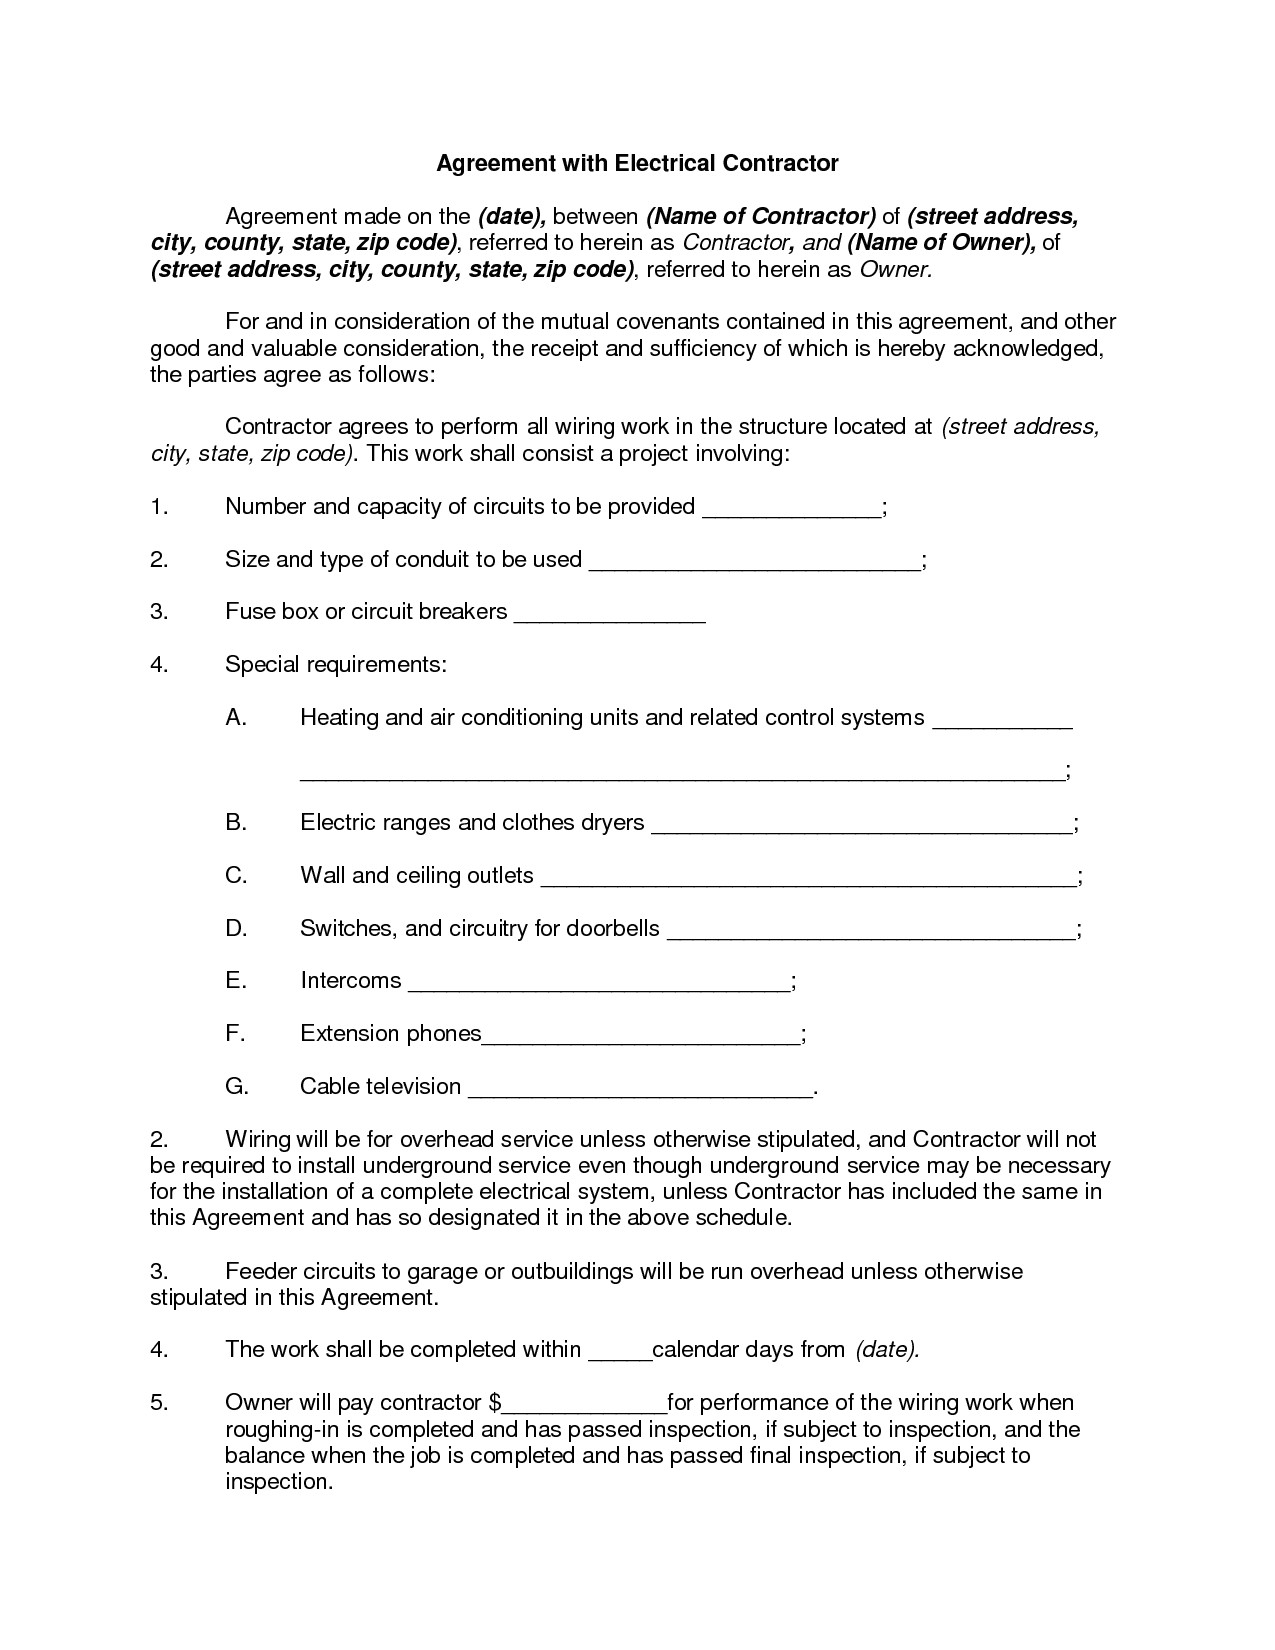 post standard contract agreement template 385175